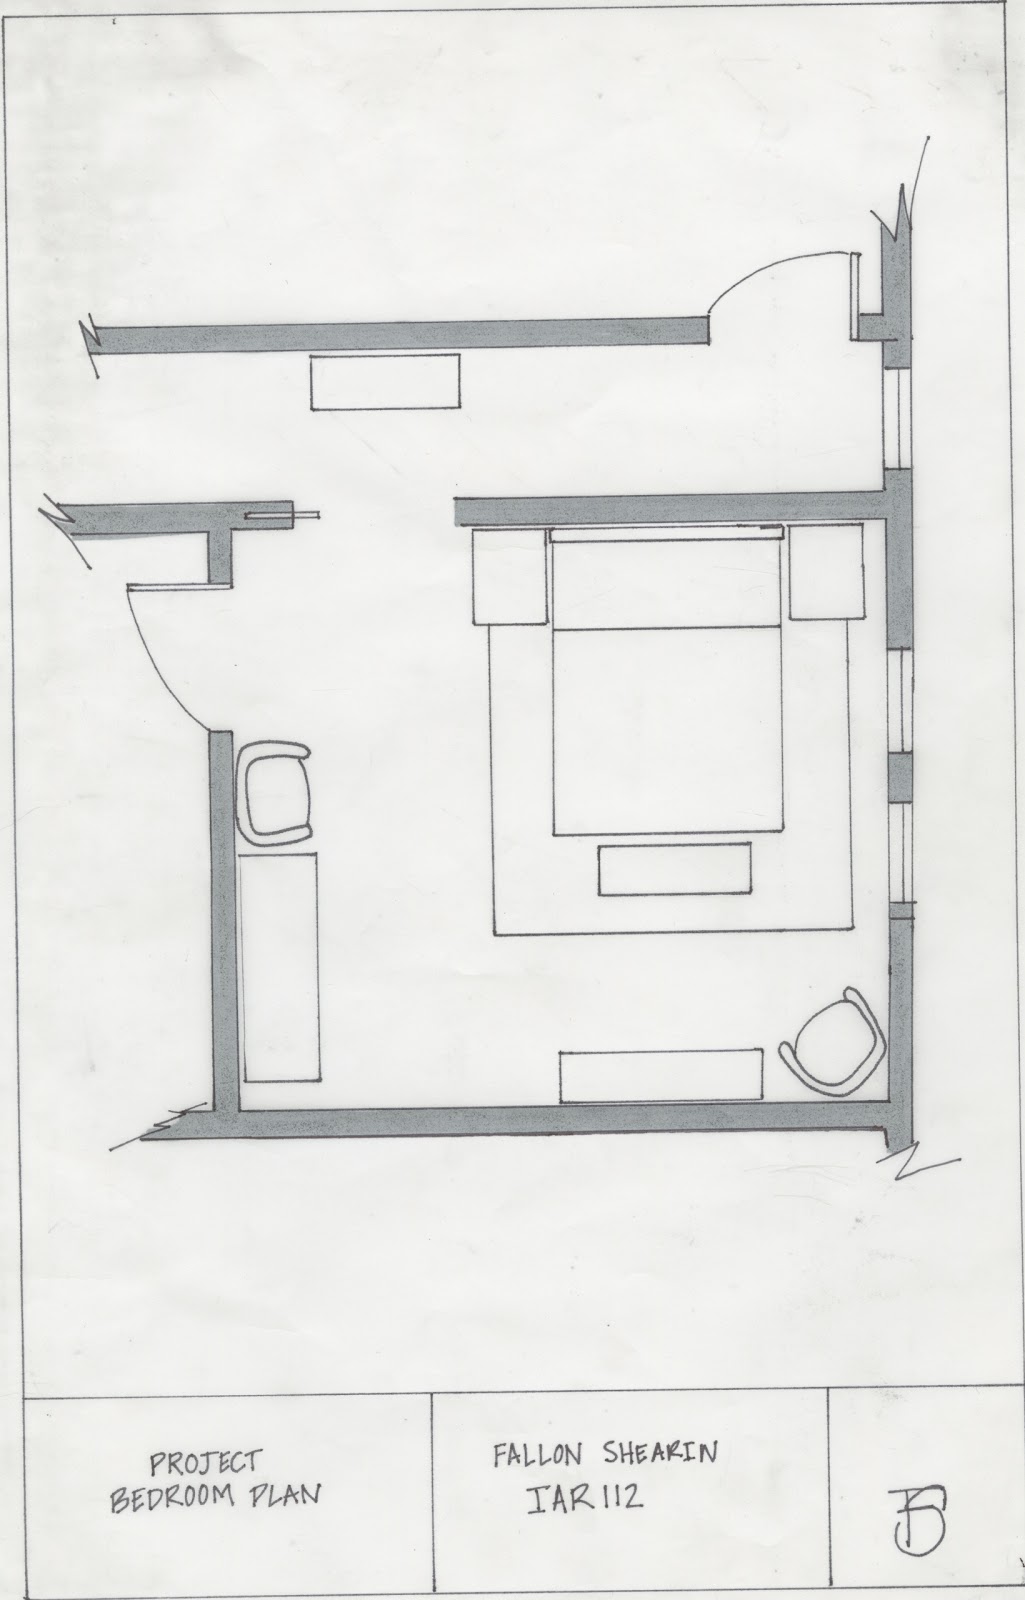 Fallon Shearin Design: Project2.2 Bedroom in Block Drawing and Plan